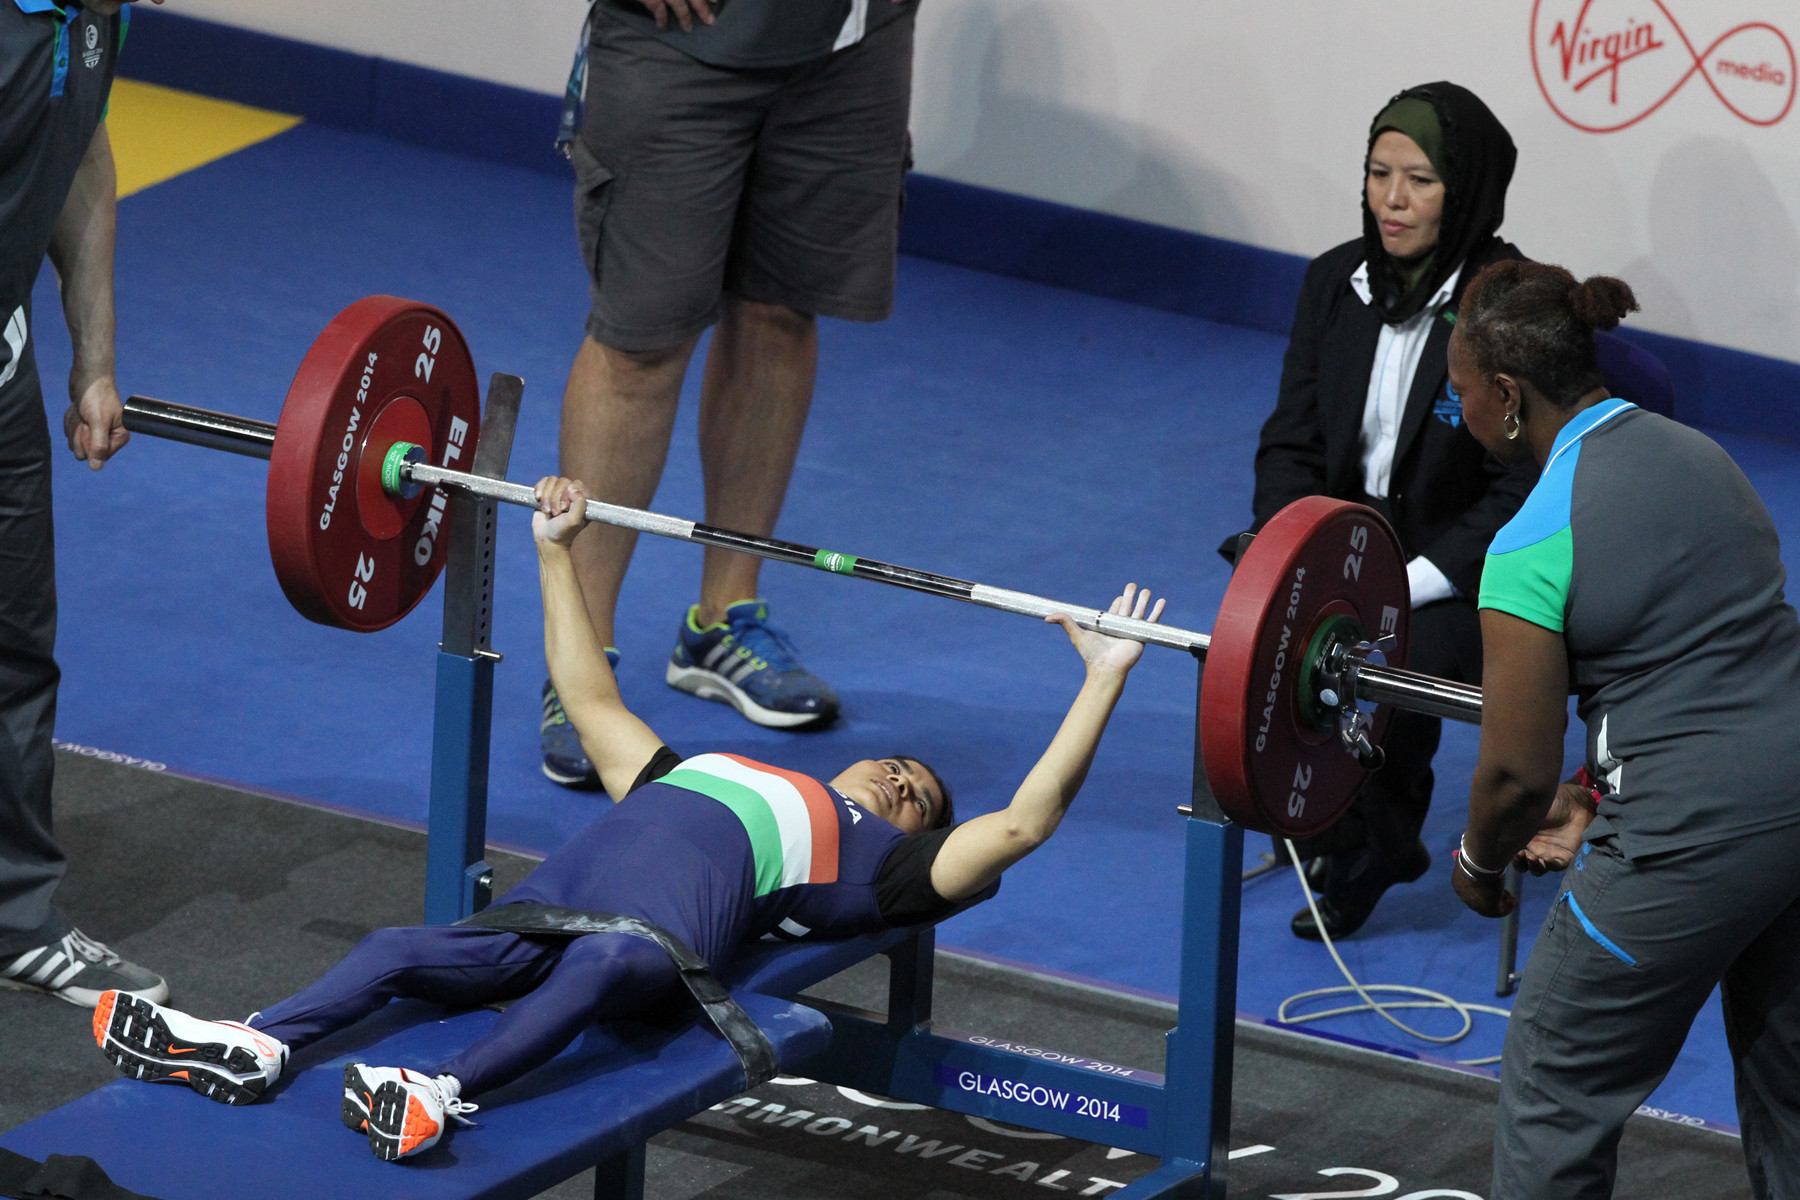 Sakina Khatun competed for India at Glasgow 2014 but faces the prospect of having to miss Gold Coast 2018 because the Paralympic Committee of India did not complete the paperwork correctly ©Getty Images